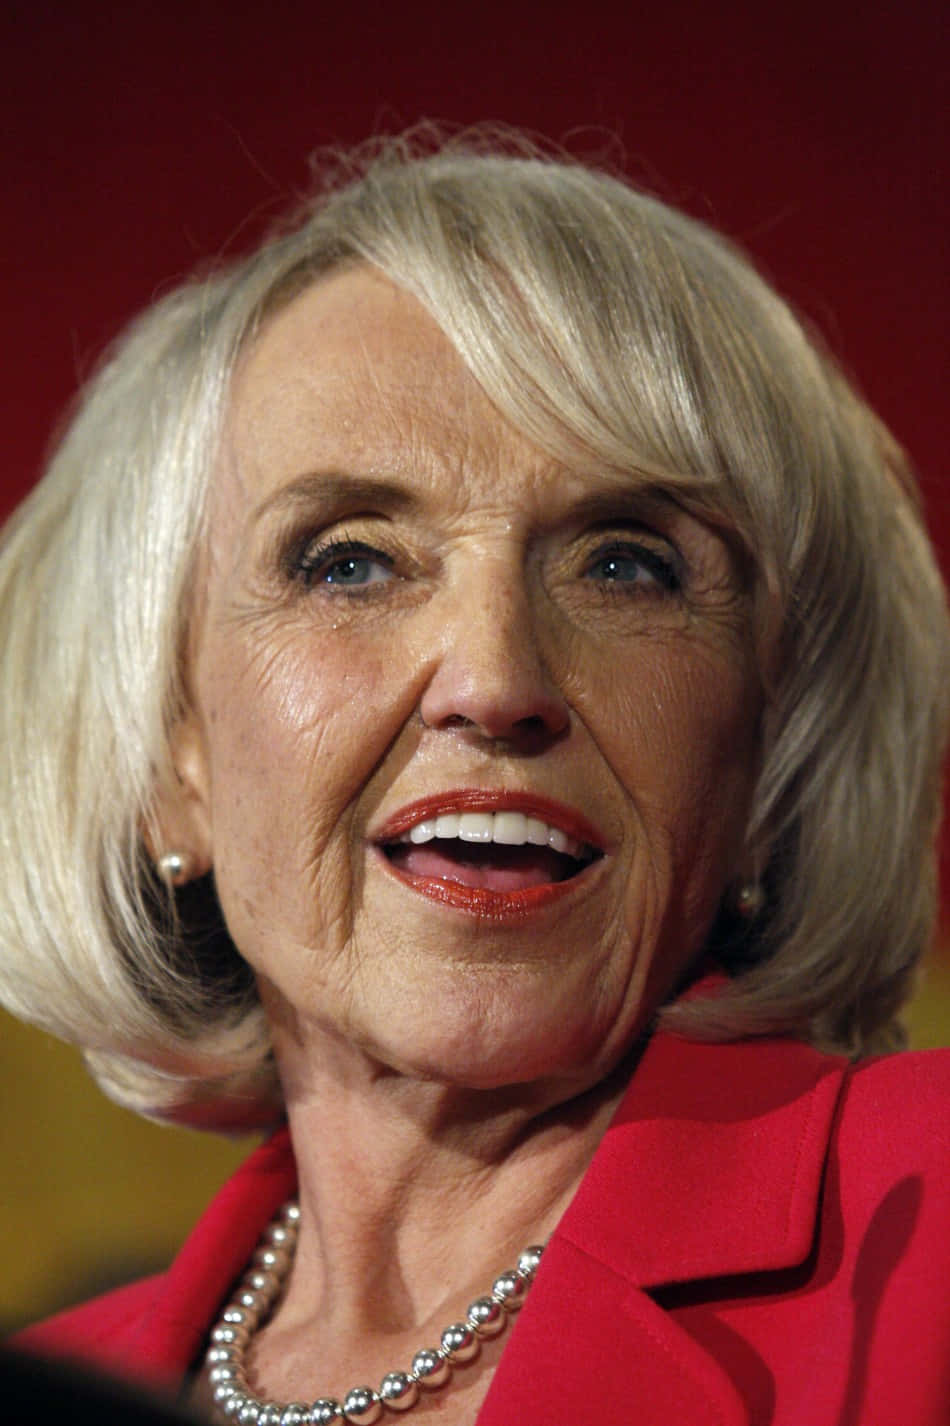 Jan Brewer Speaking At A Political Event Wallpaper